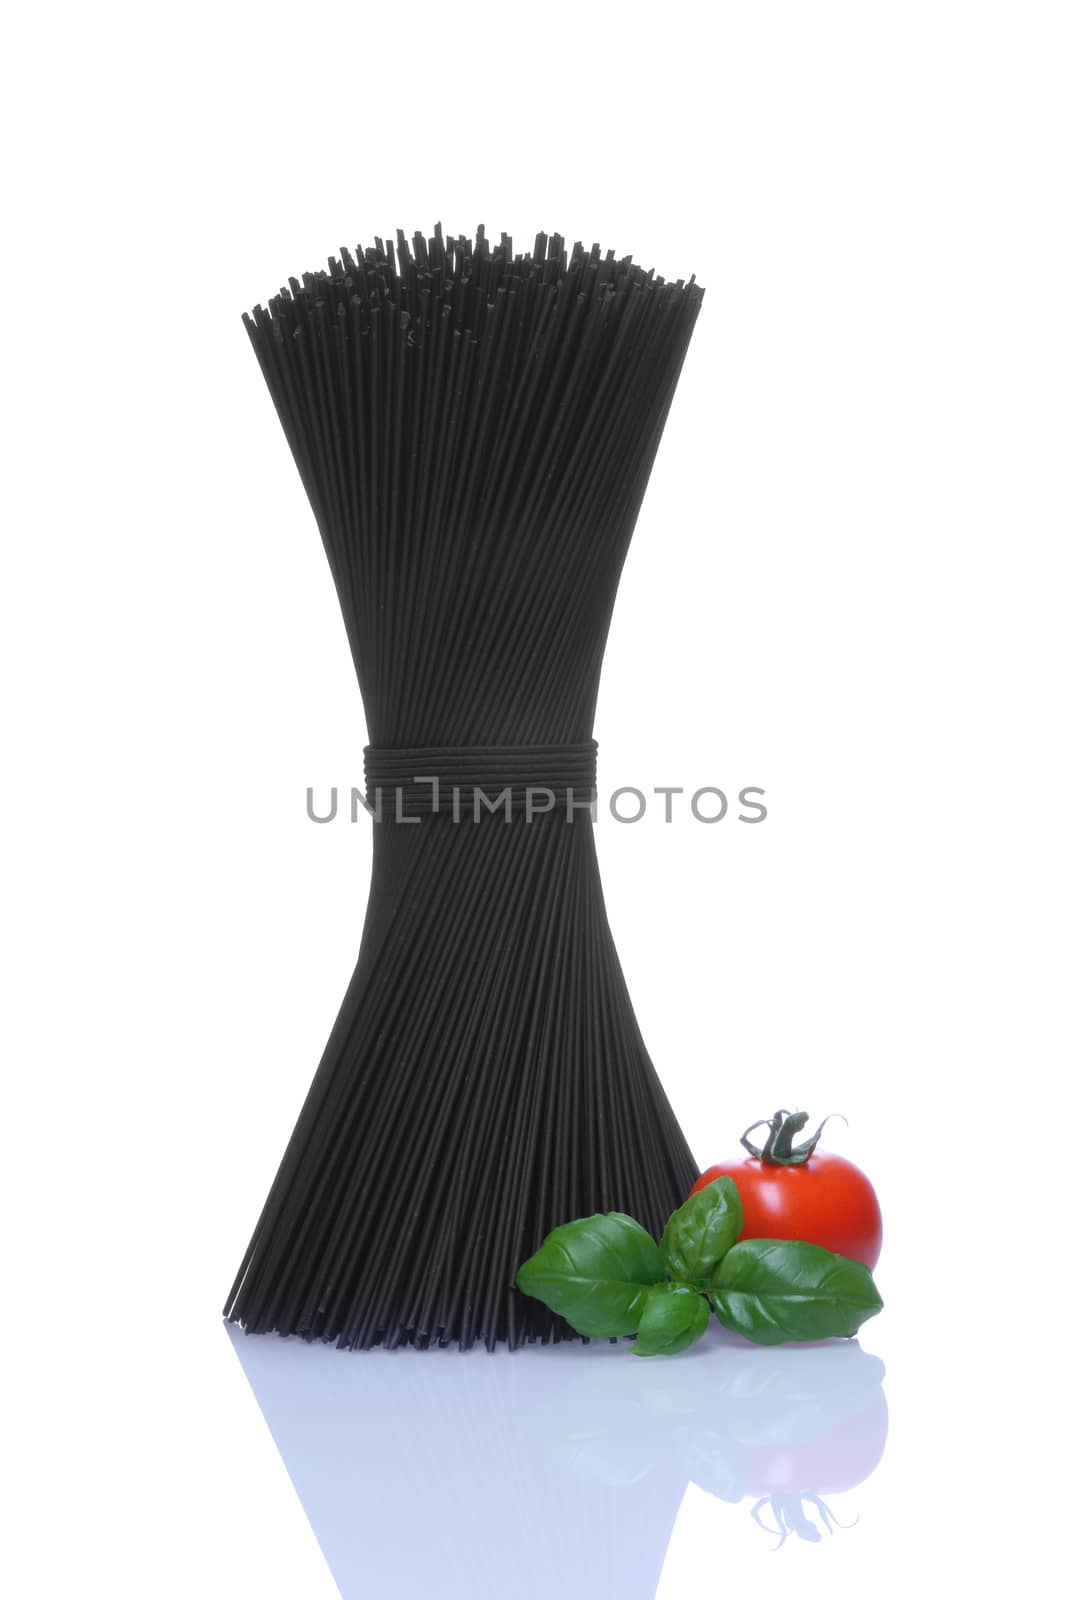 Black spaghetti with basel leaves and red tomato on white background by Fischeron